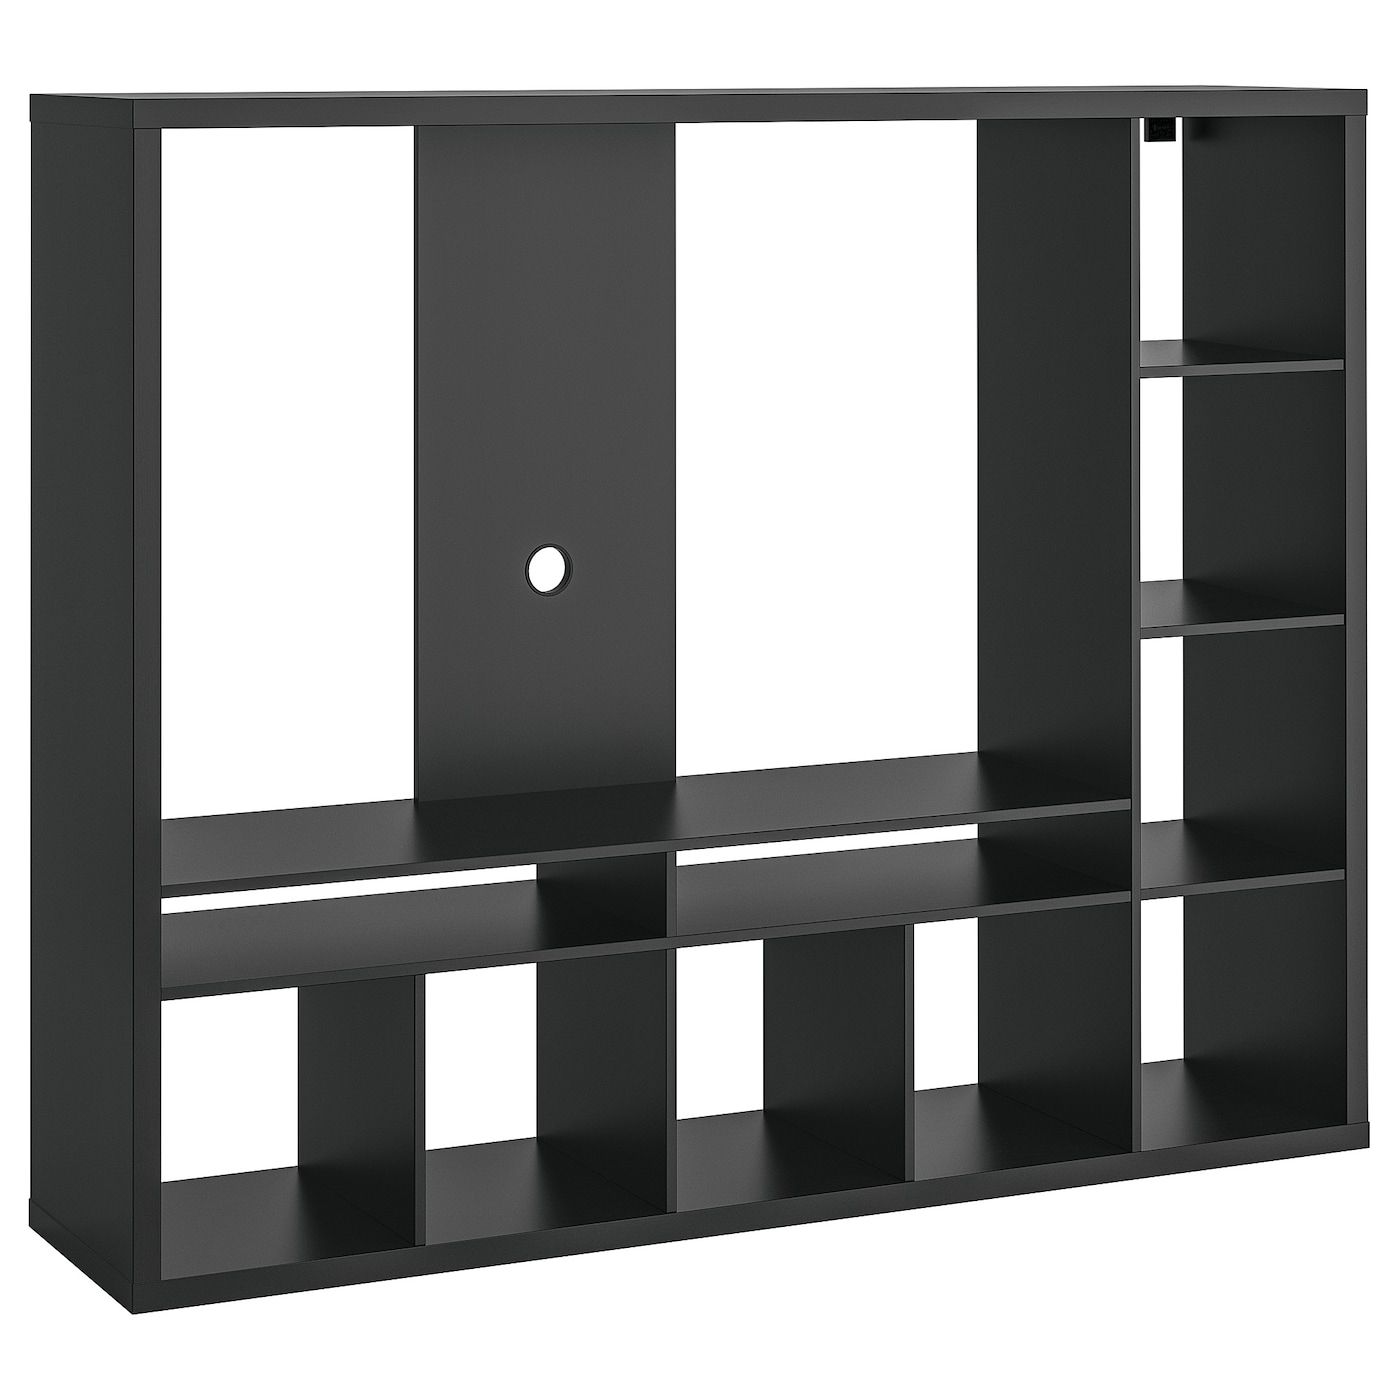 Lappland Tv Storage Unit, Black Brown, 72x15 3/8x57 7/8" – Ikea In Well Known Black Square Tv Stands (View 3 of 10)